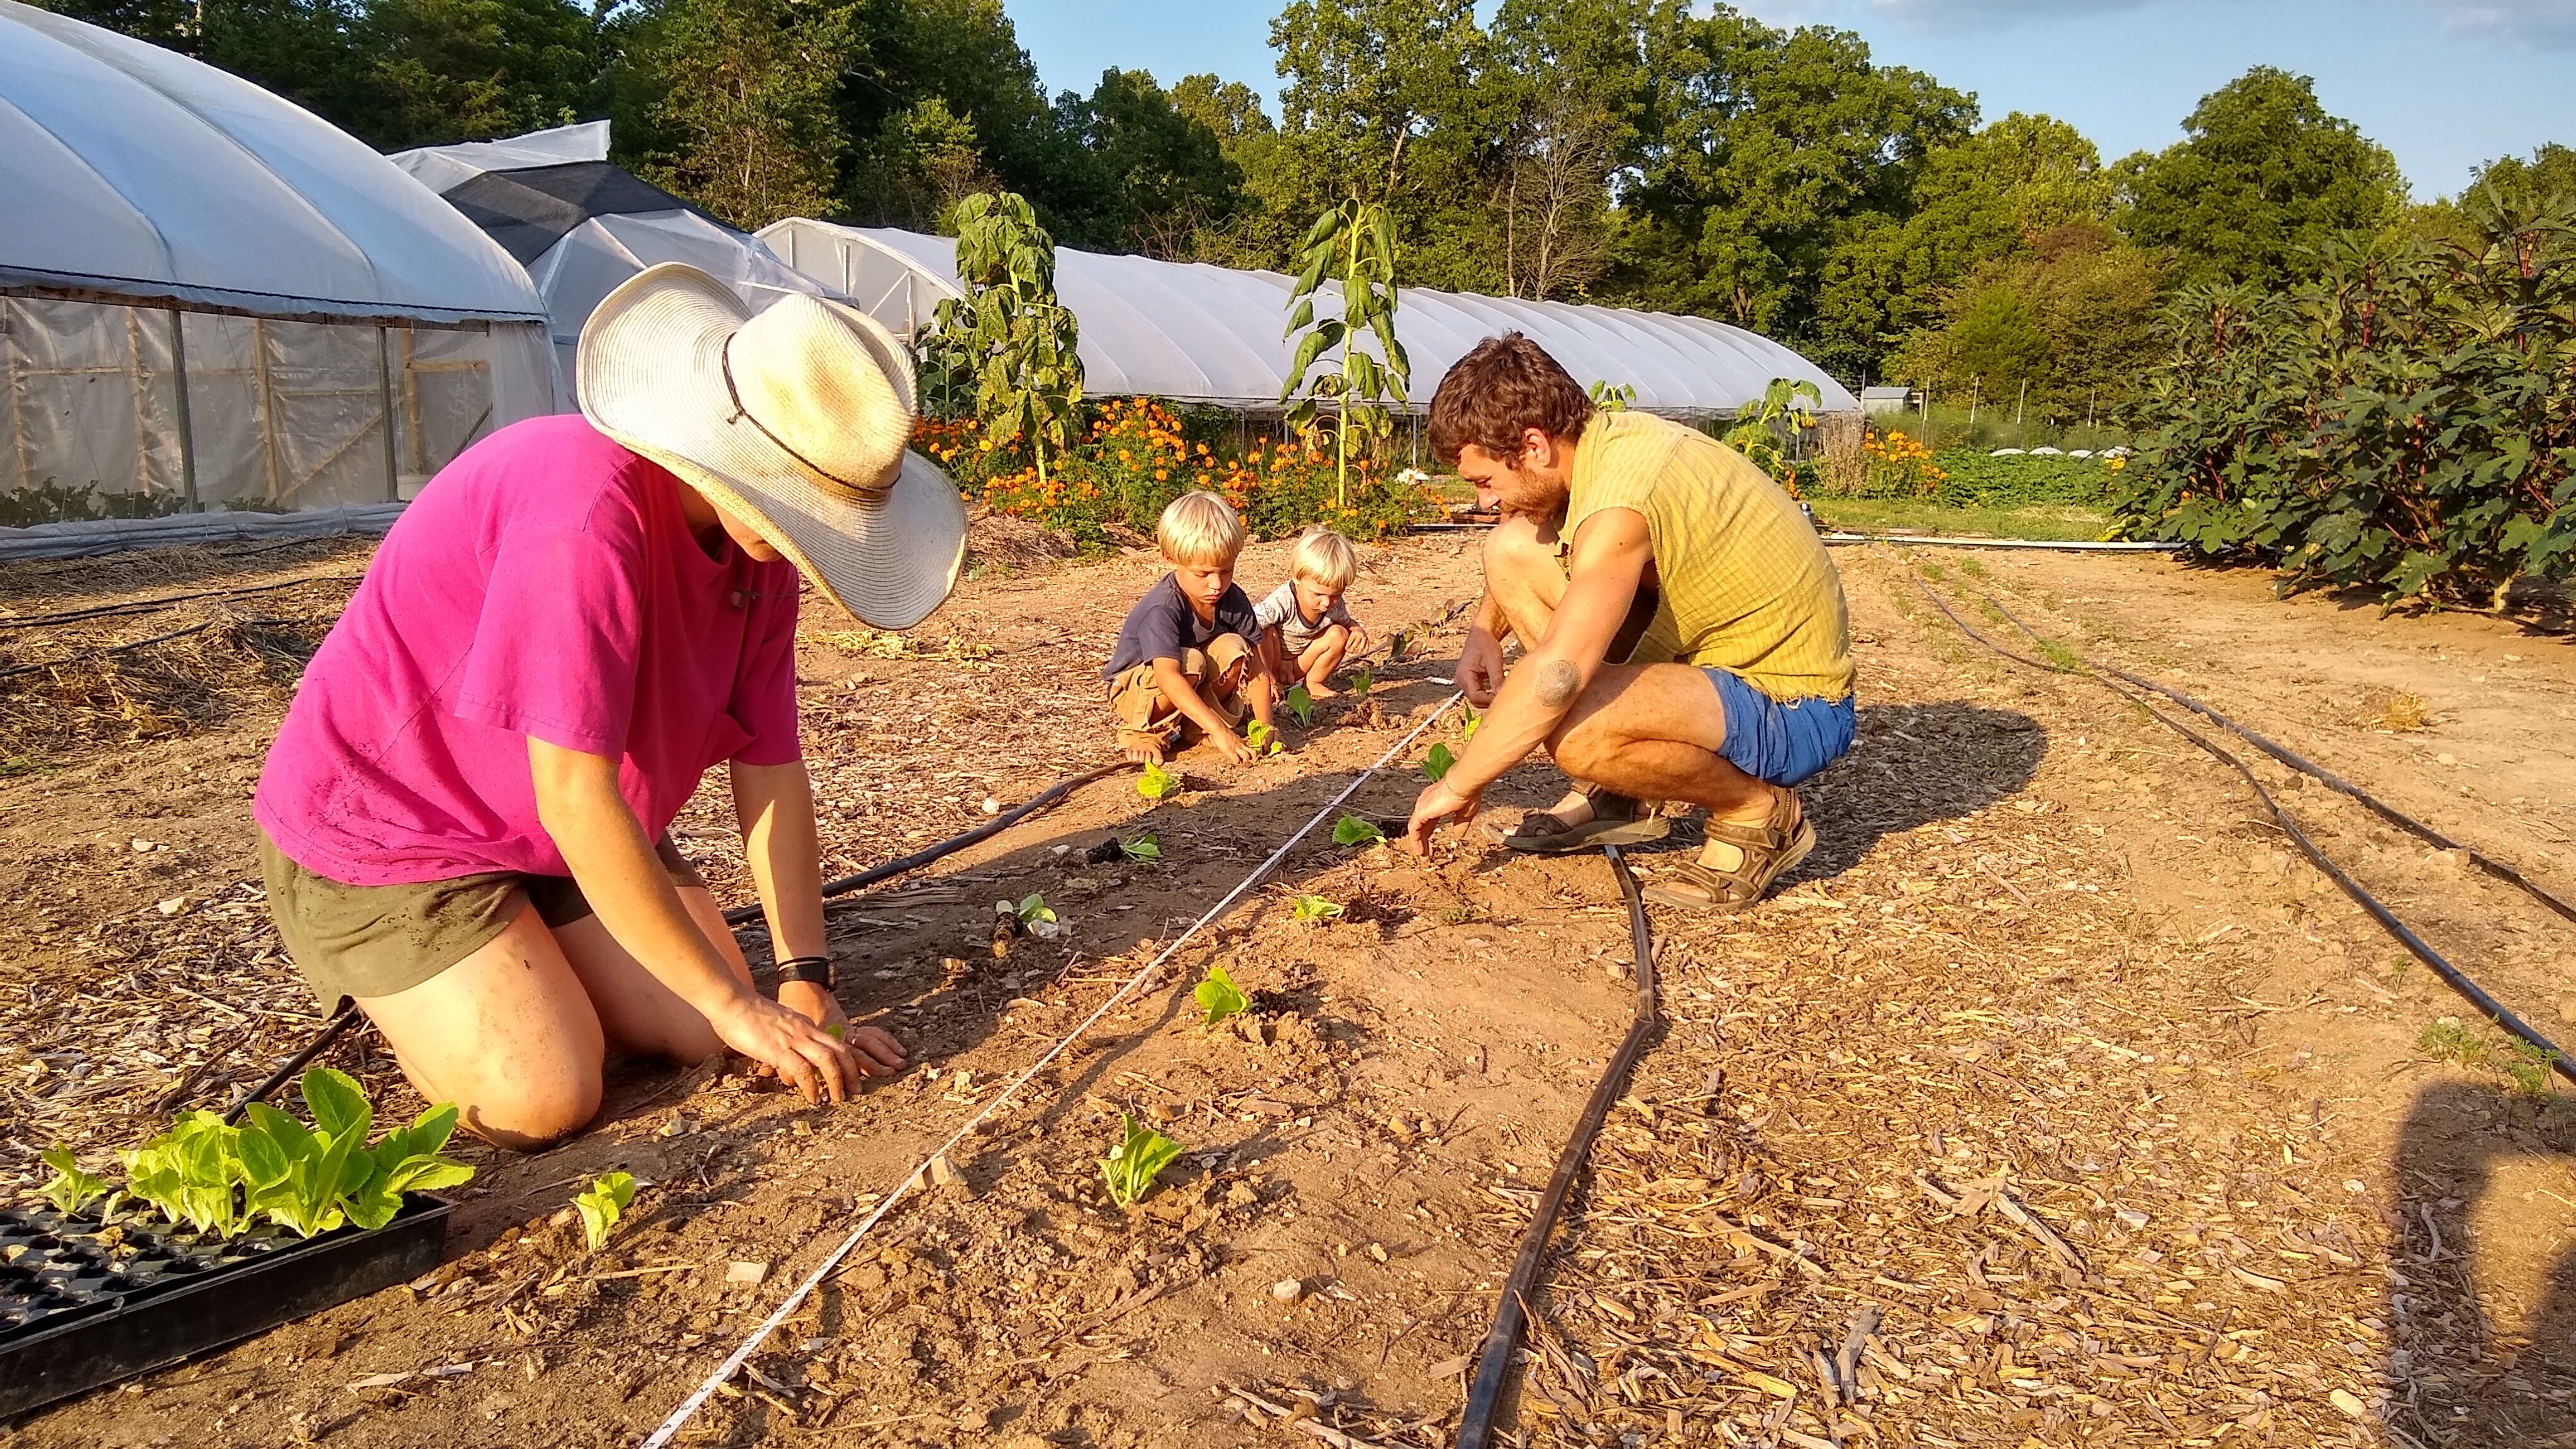 Next Happening: Farm Happenings for August 31, 2020